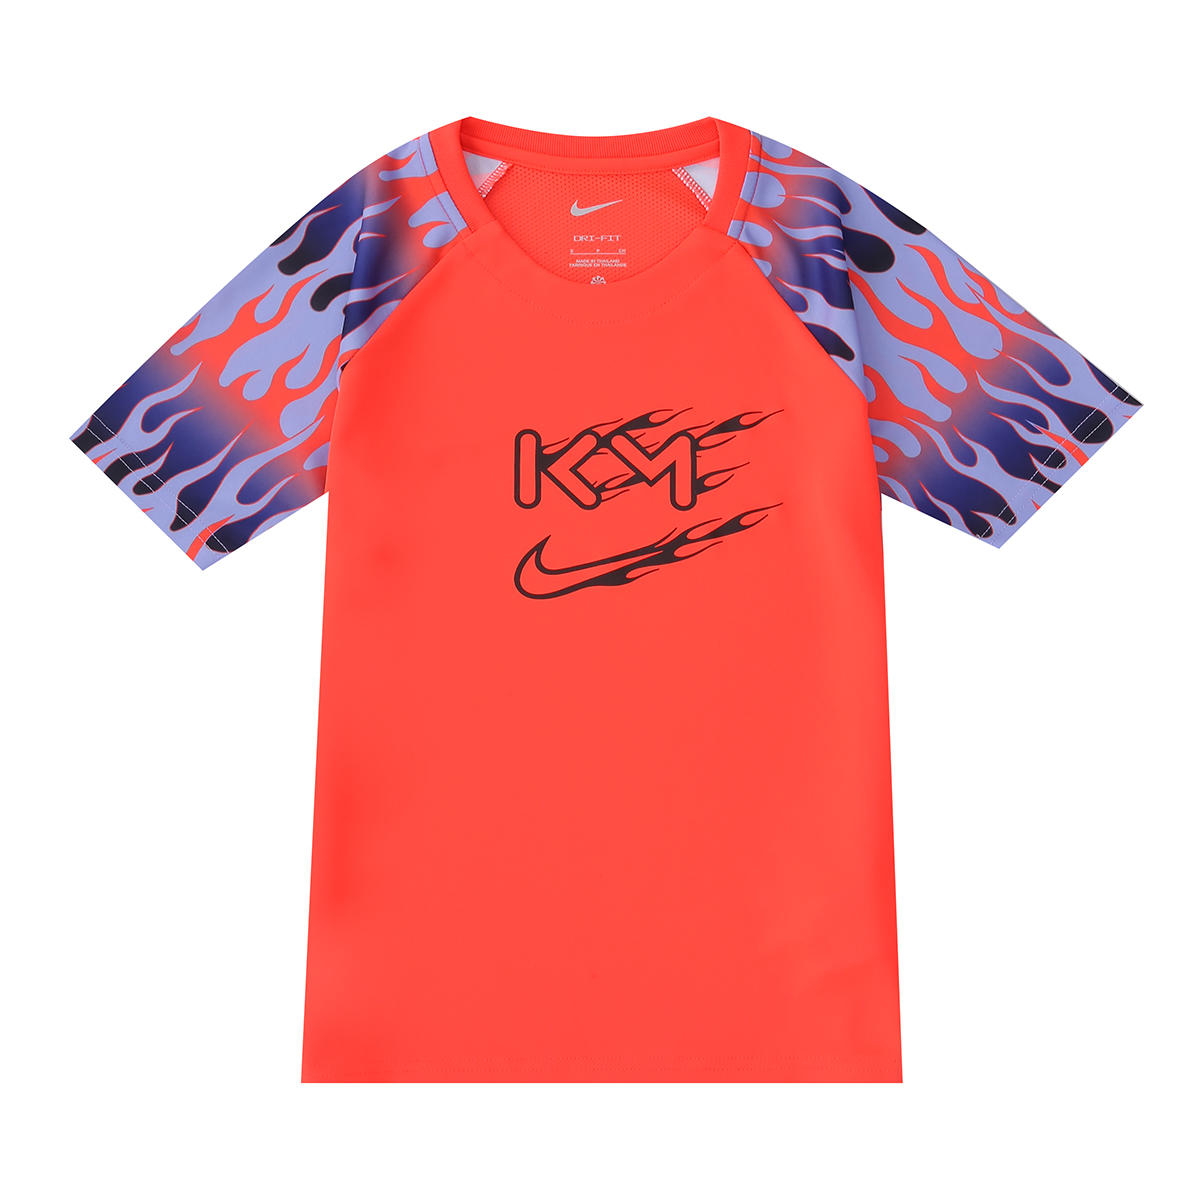 Remera Nike Dri-FIT Kylian Mbappé,  image number null